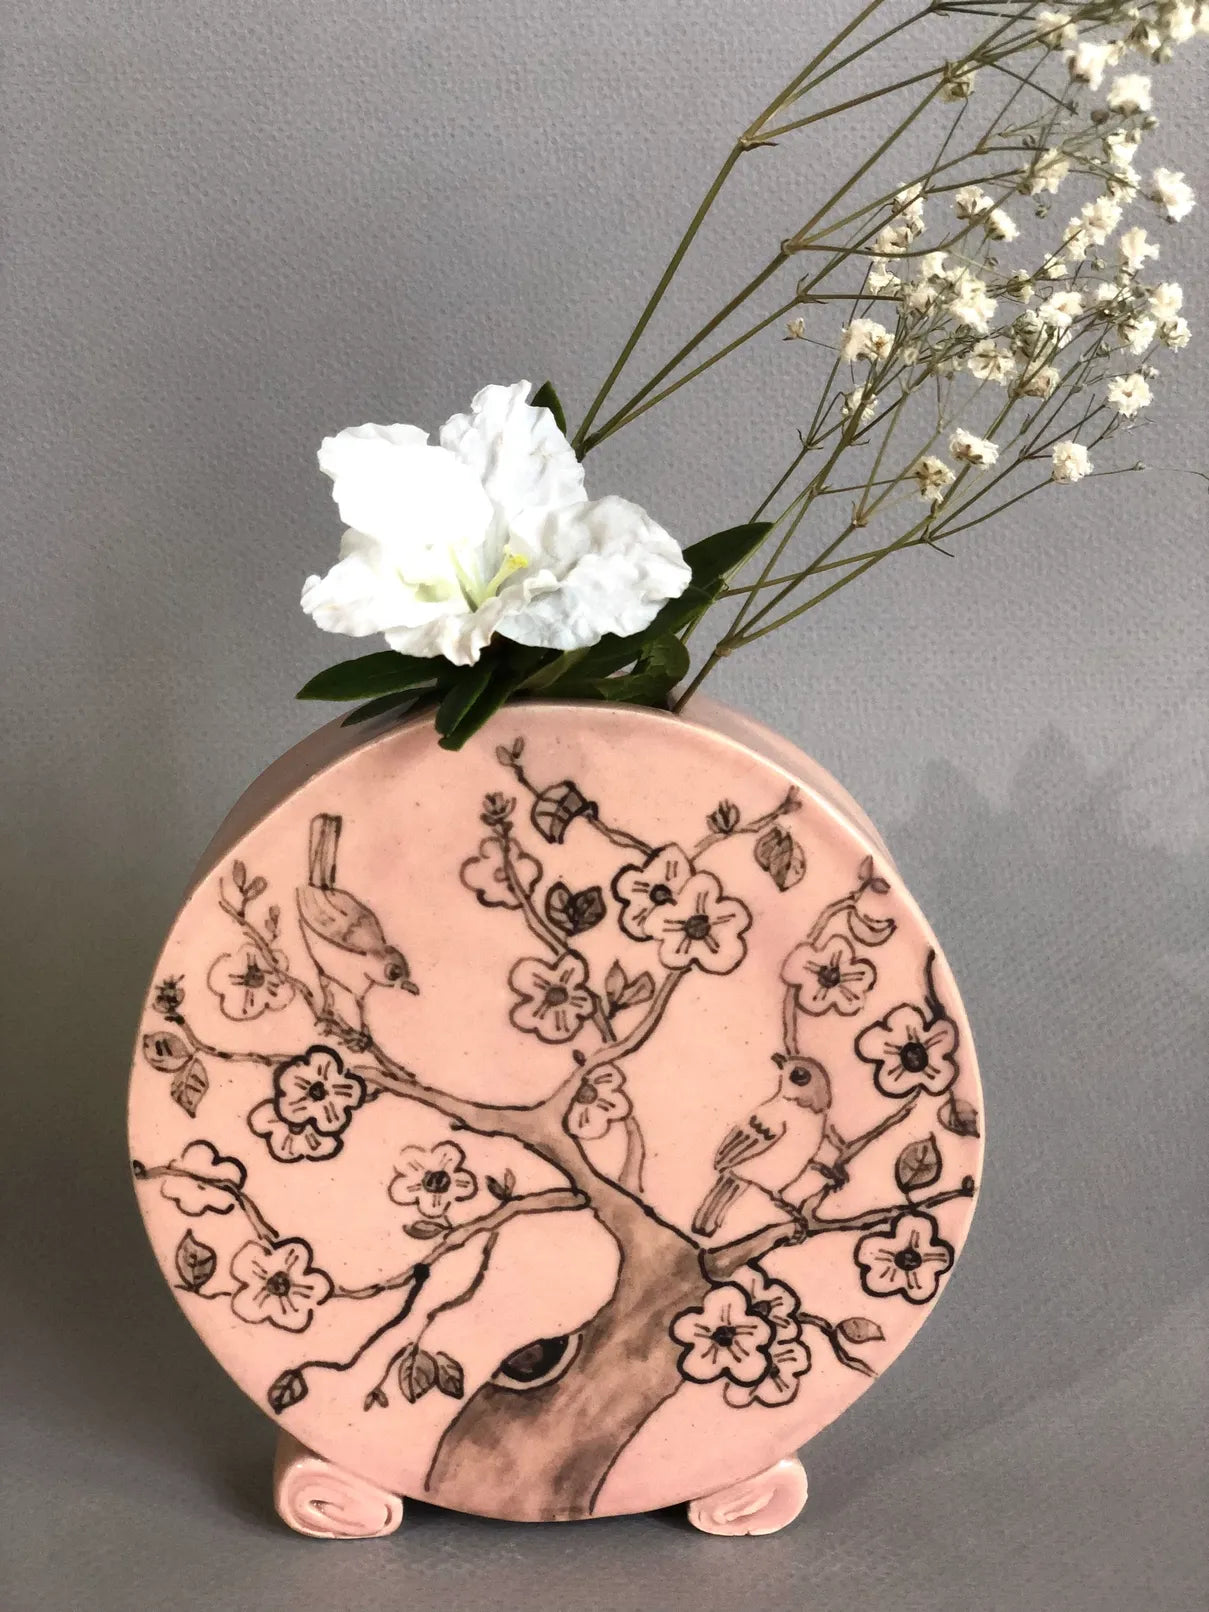 circle vase with drawings